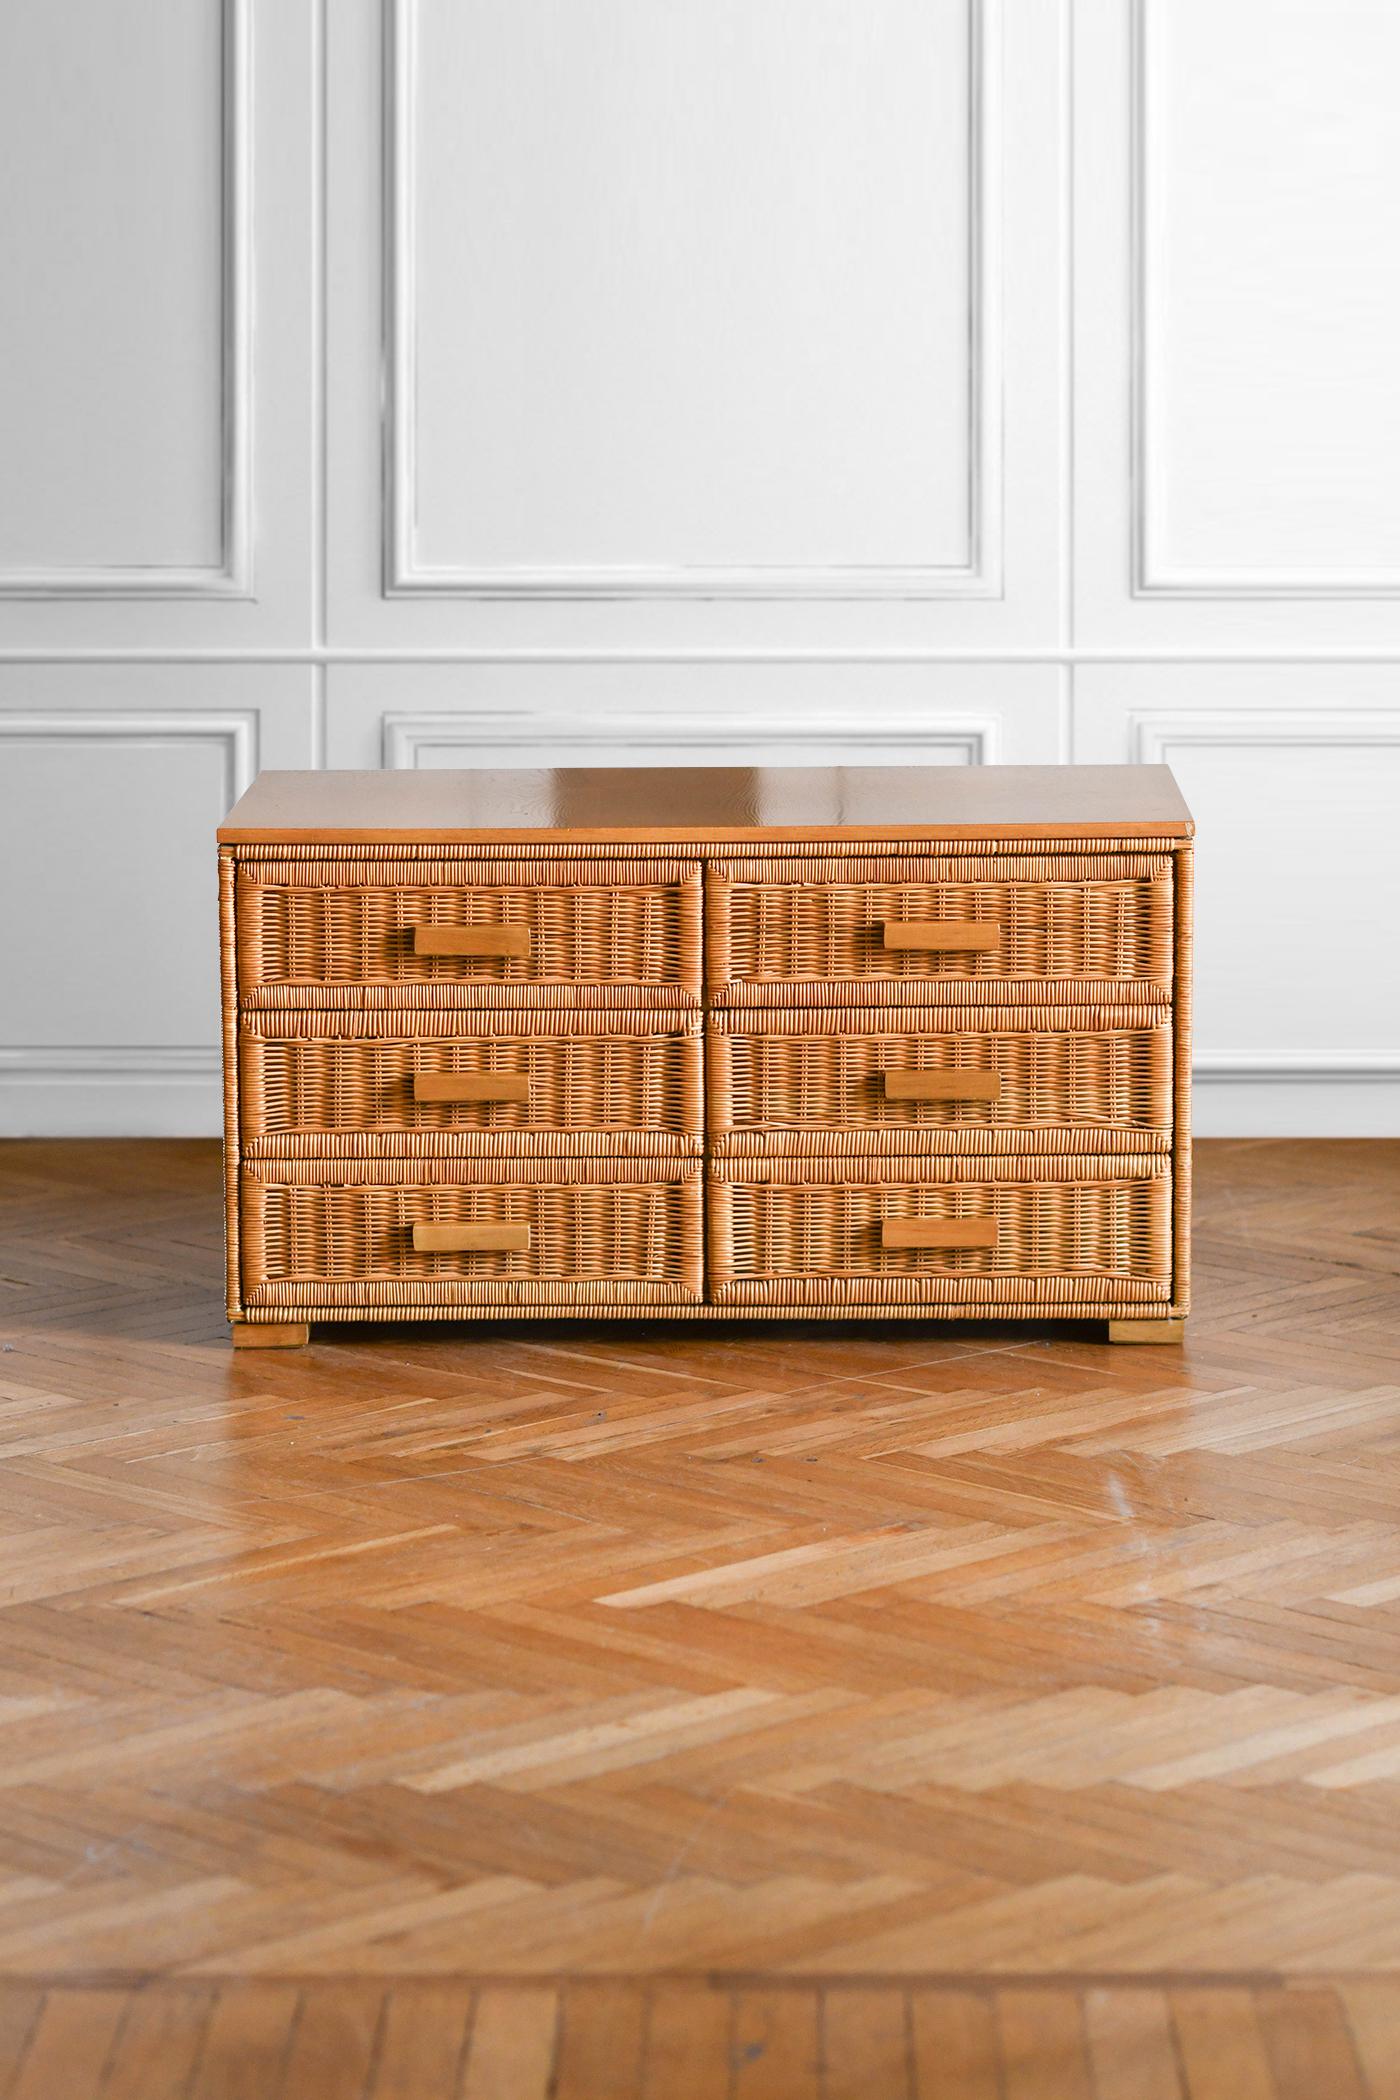 Wicker and wood chest of drawers, 1980
Product details
Dimensions: 101 W x 56 H x 50 D cm